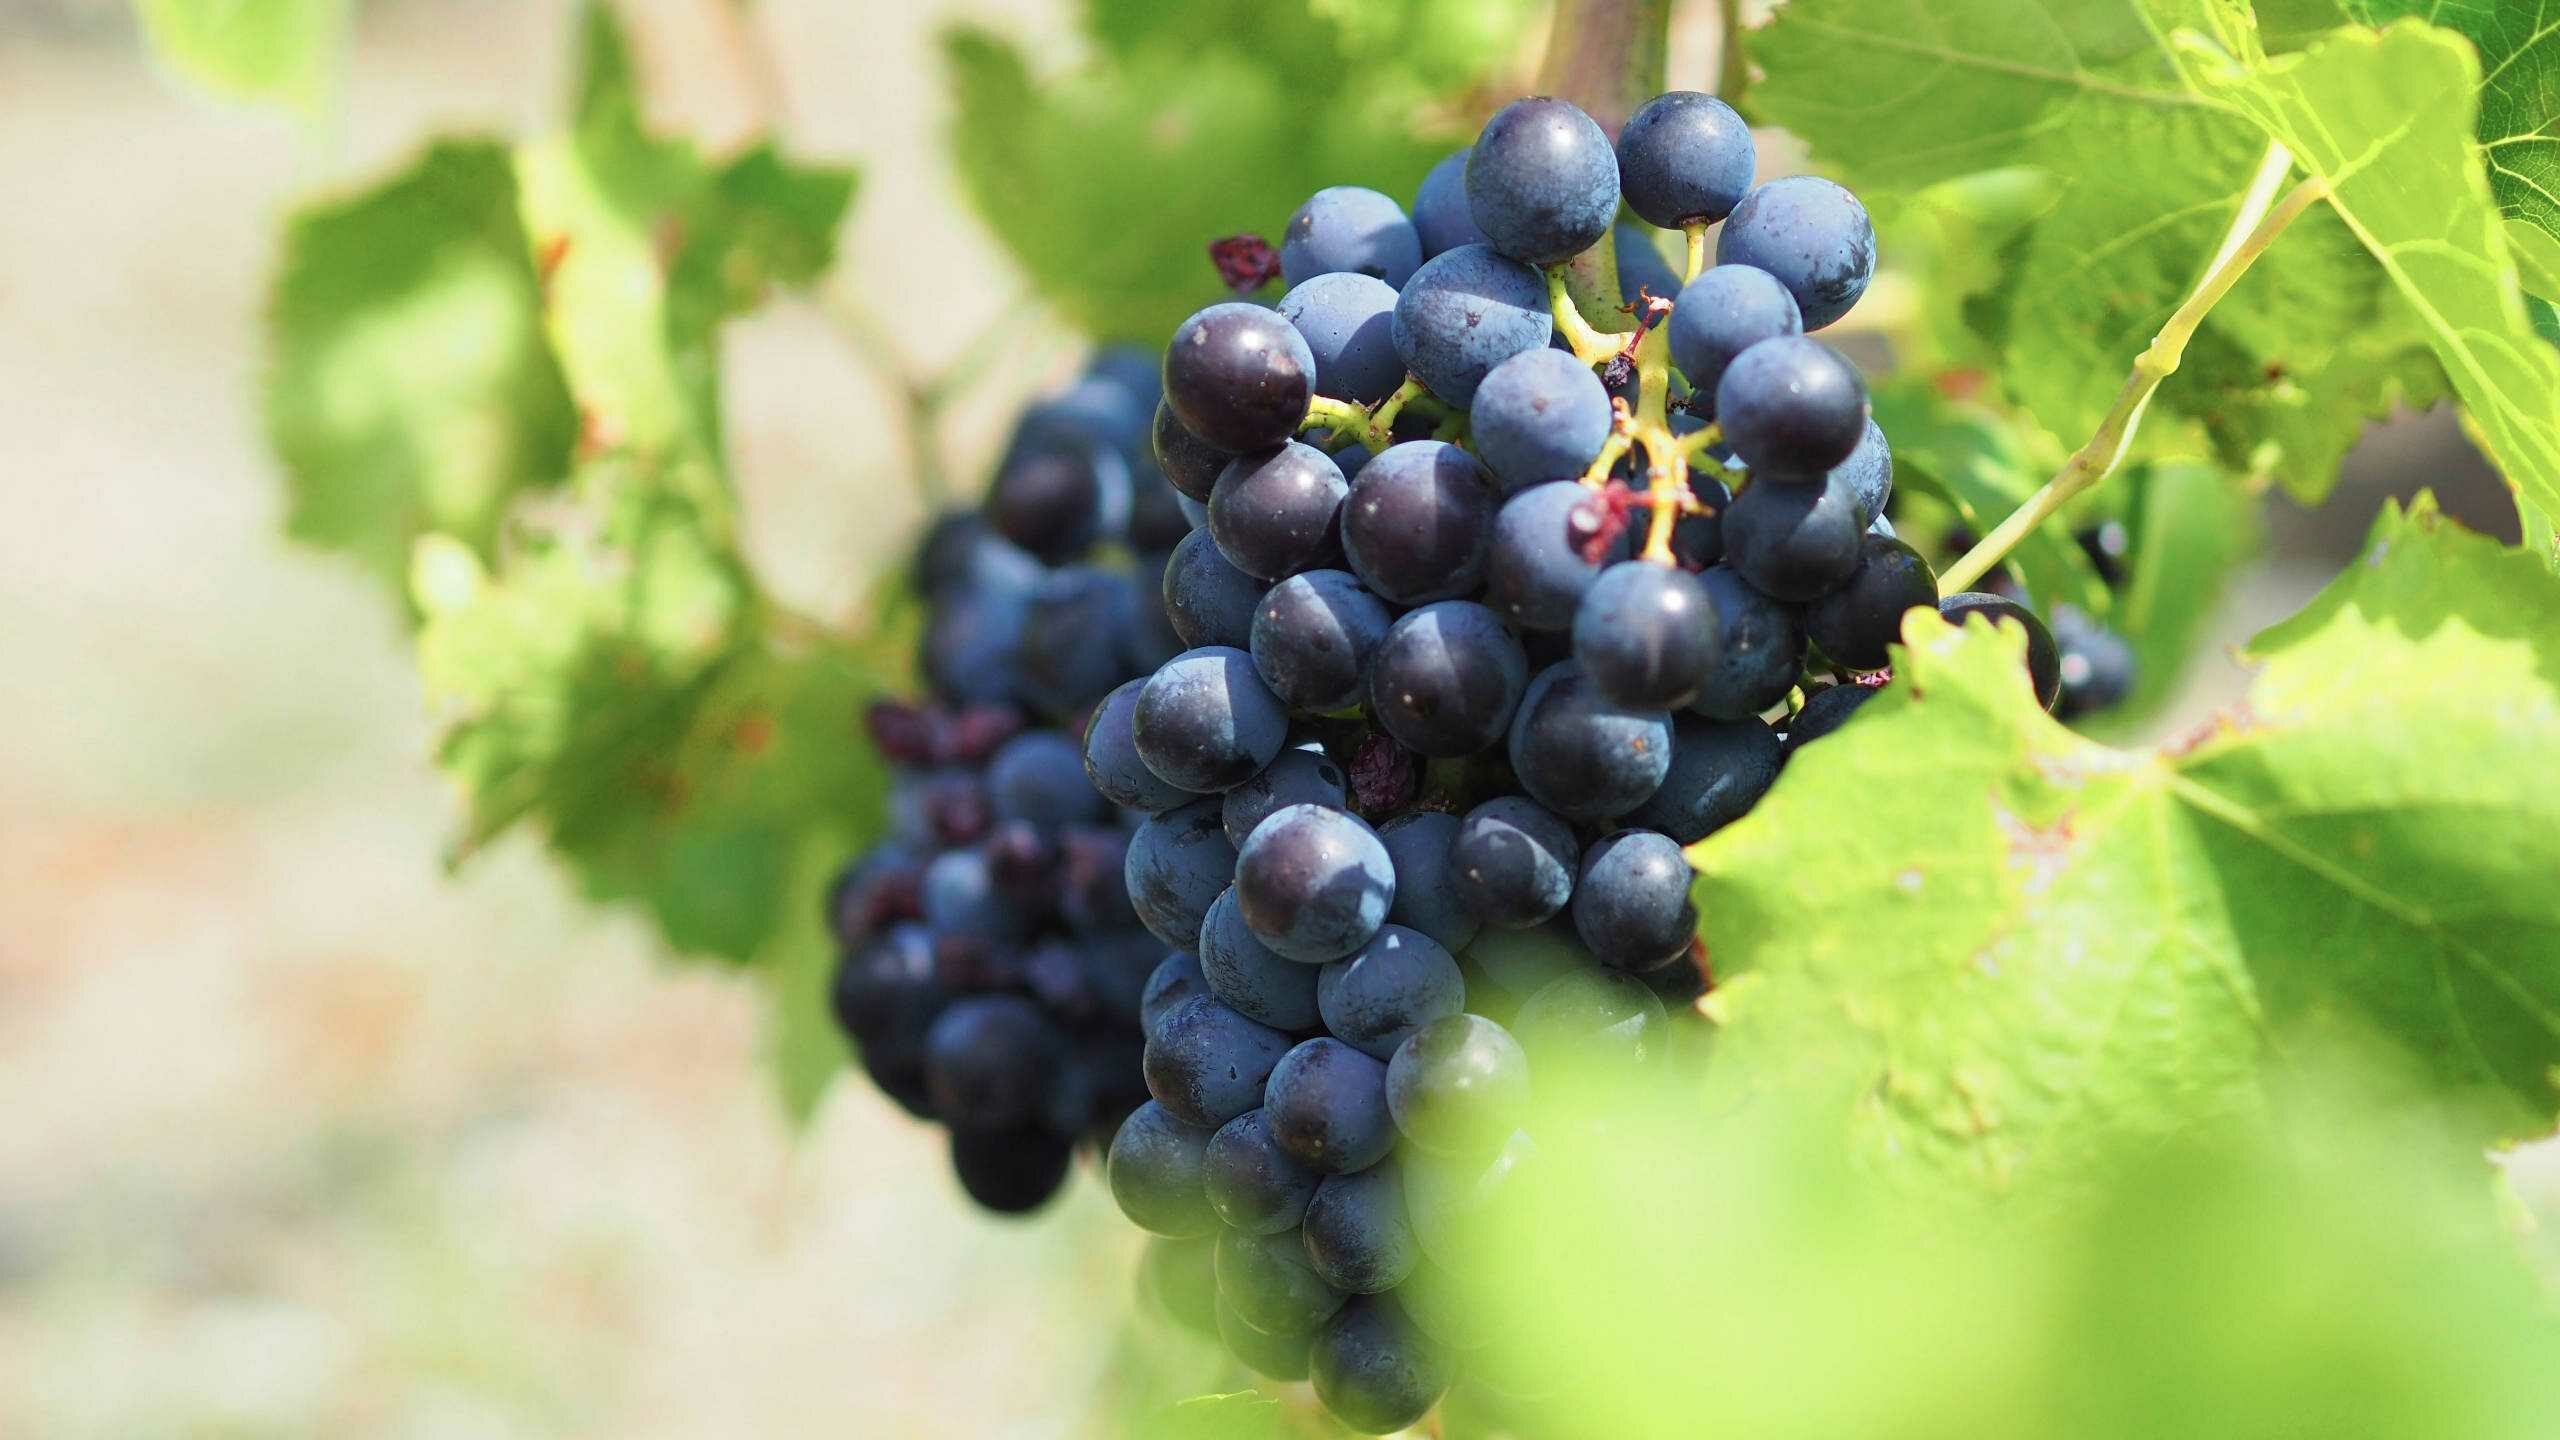 Grenache grapes growing